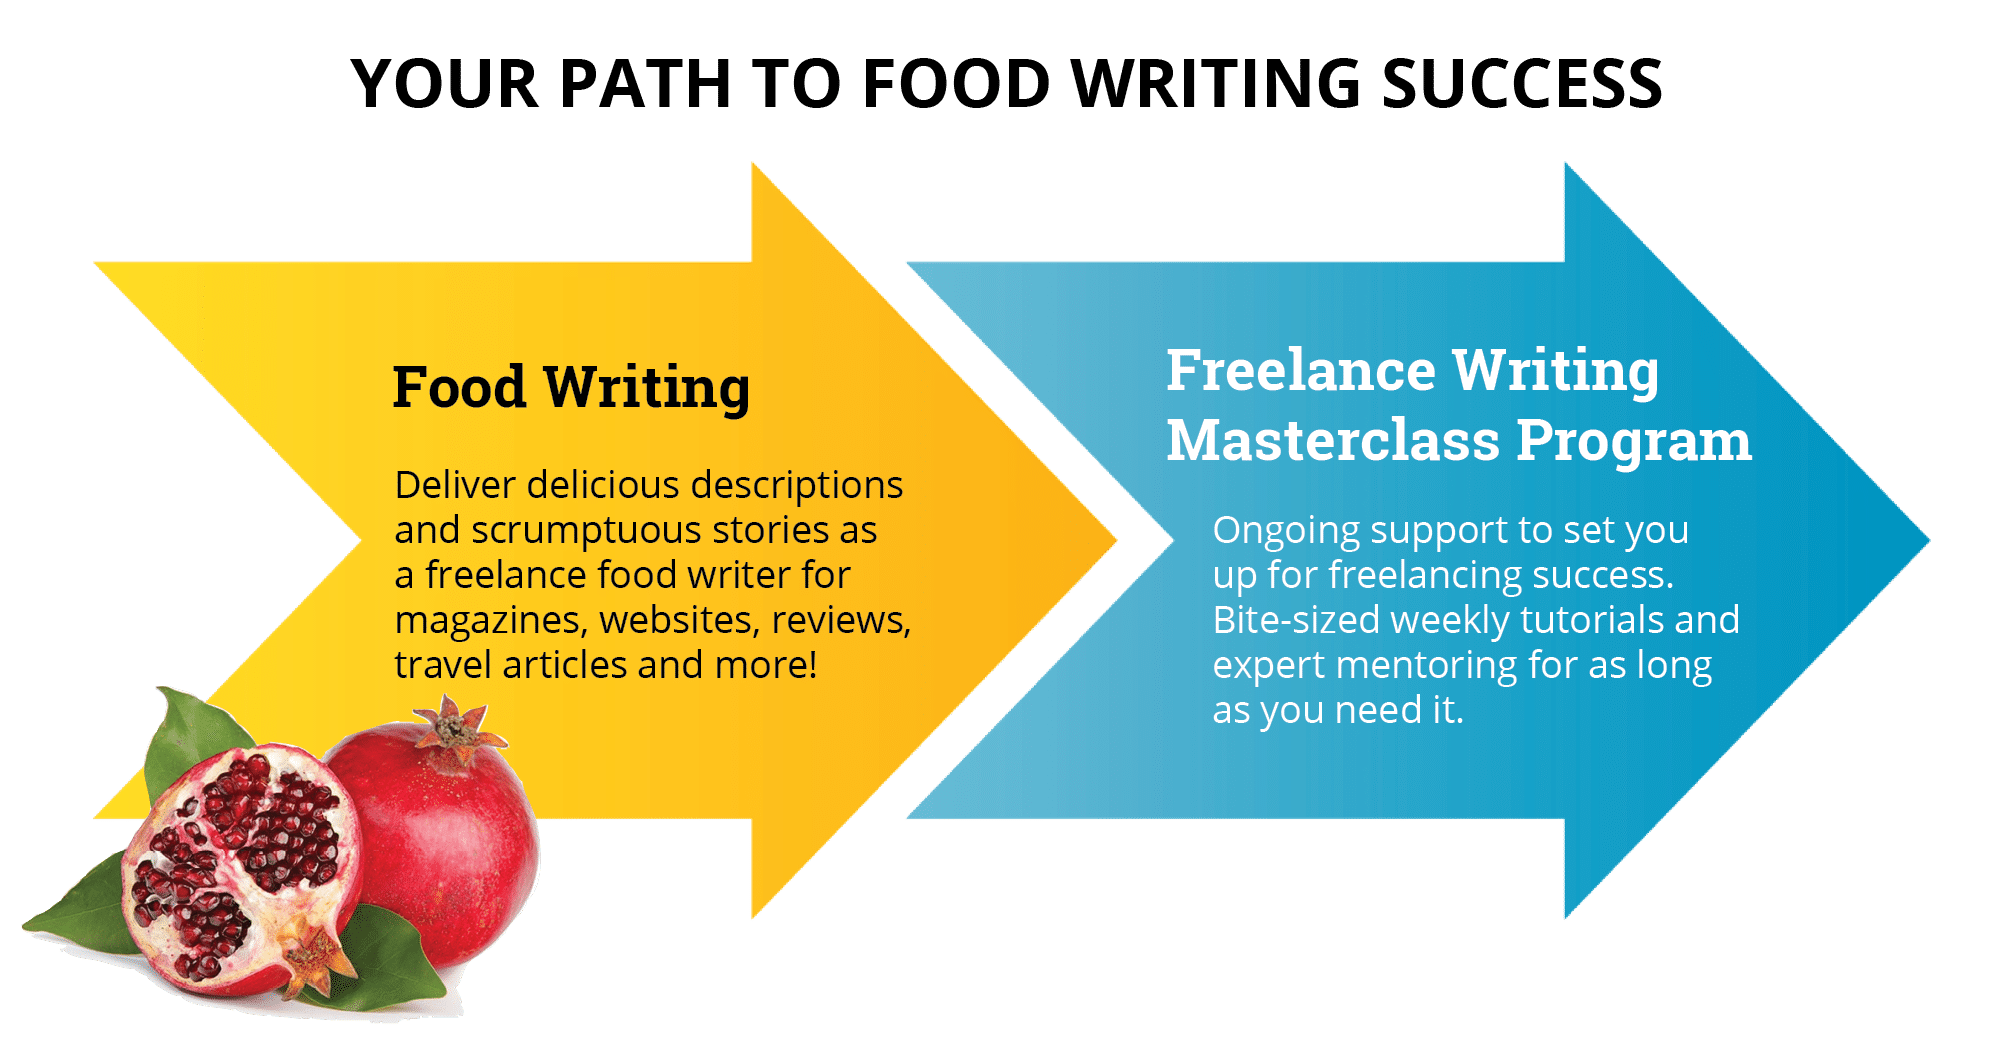 what education do you need to be a food writer